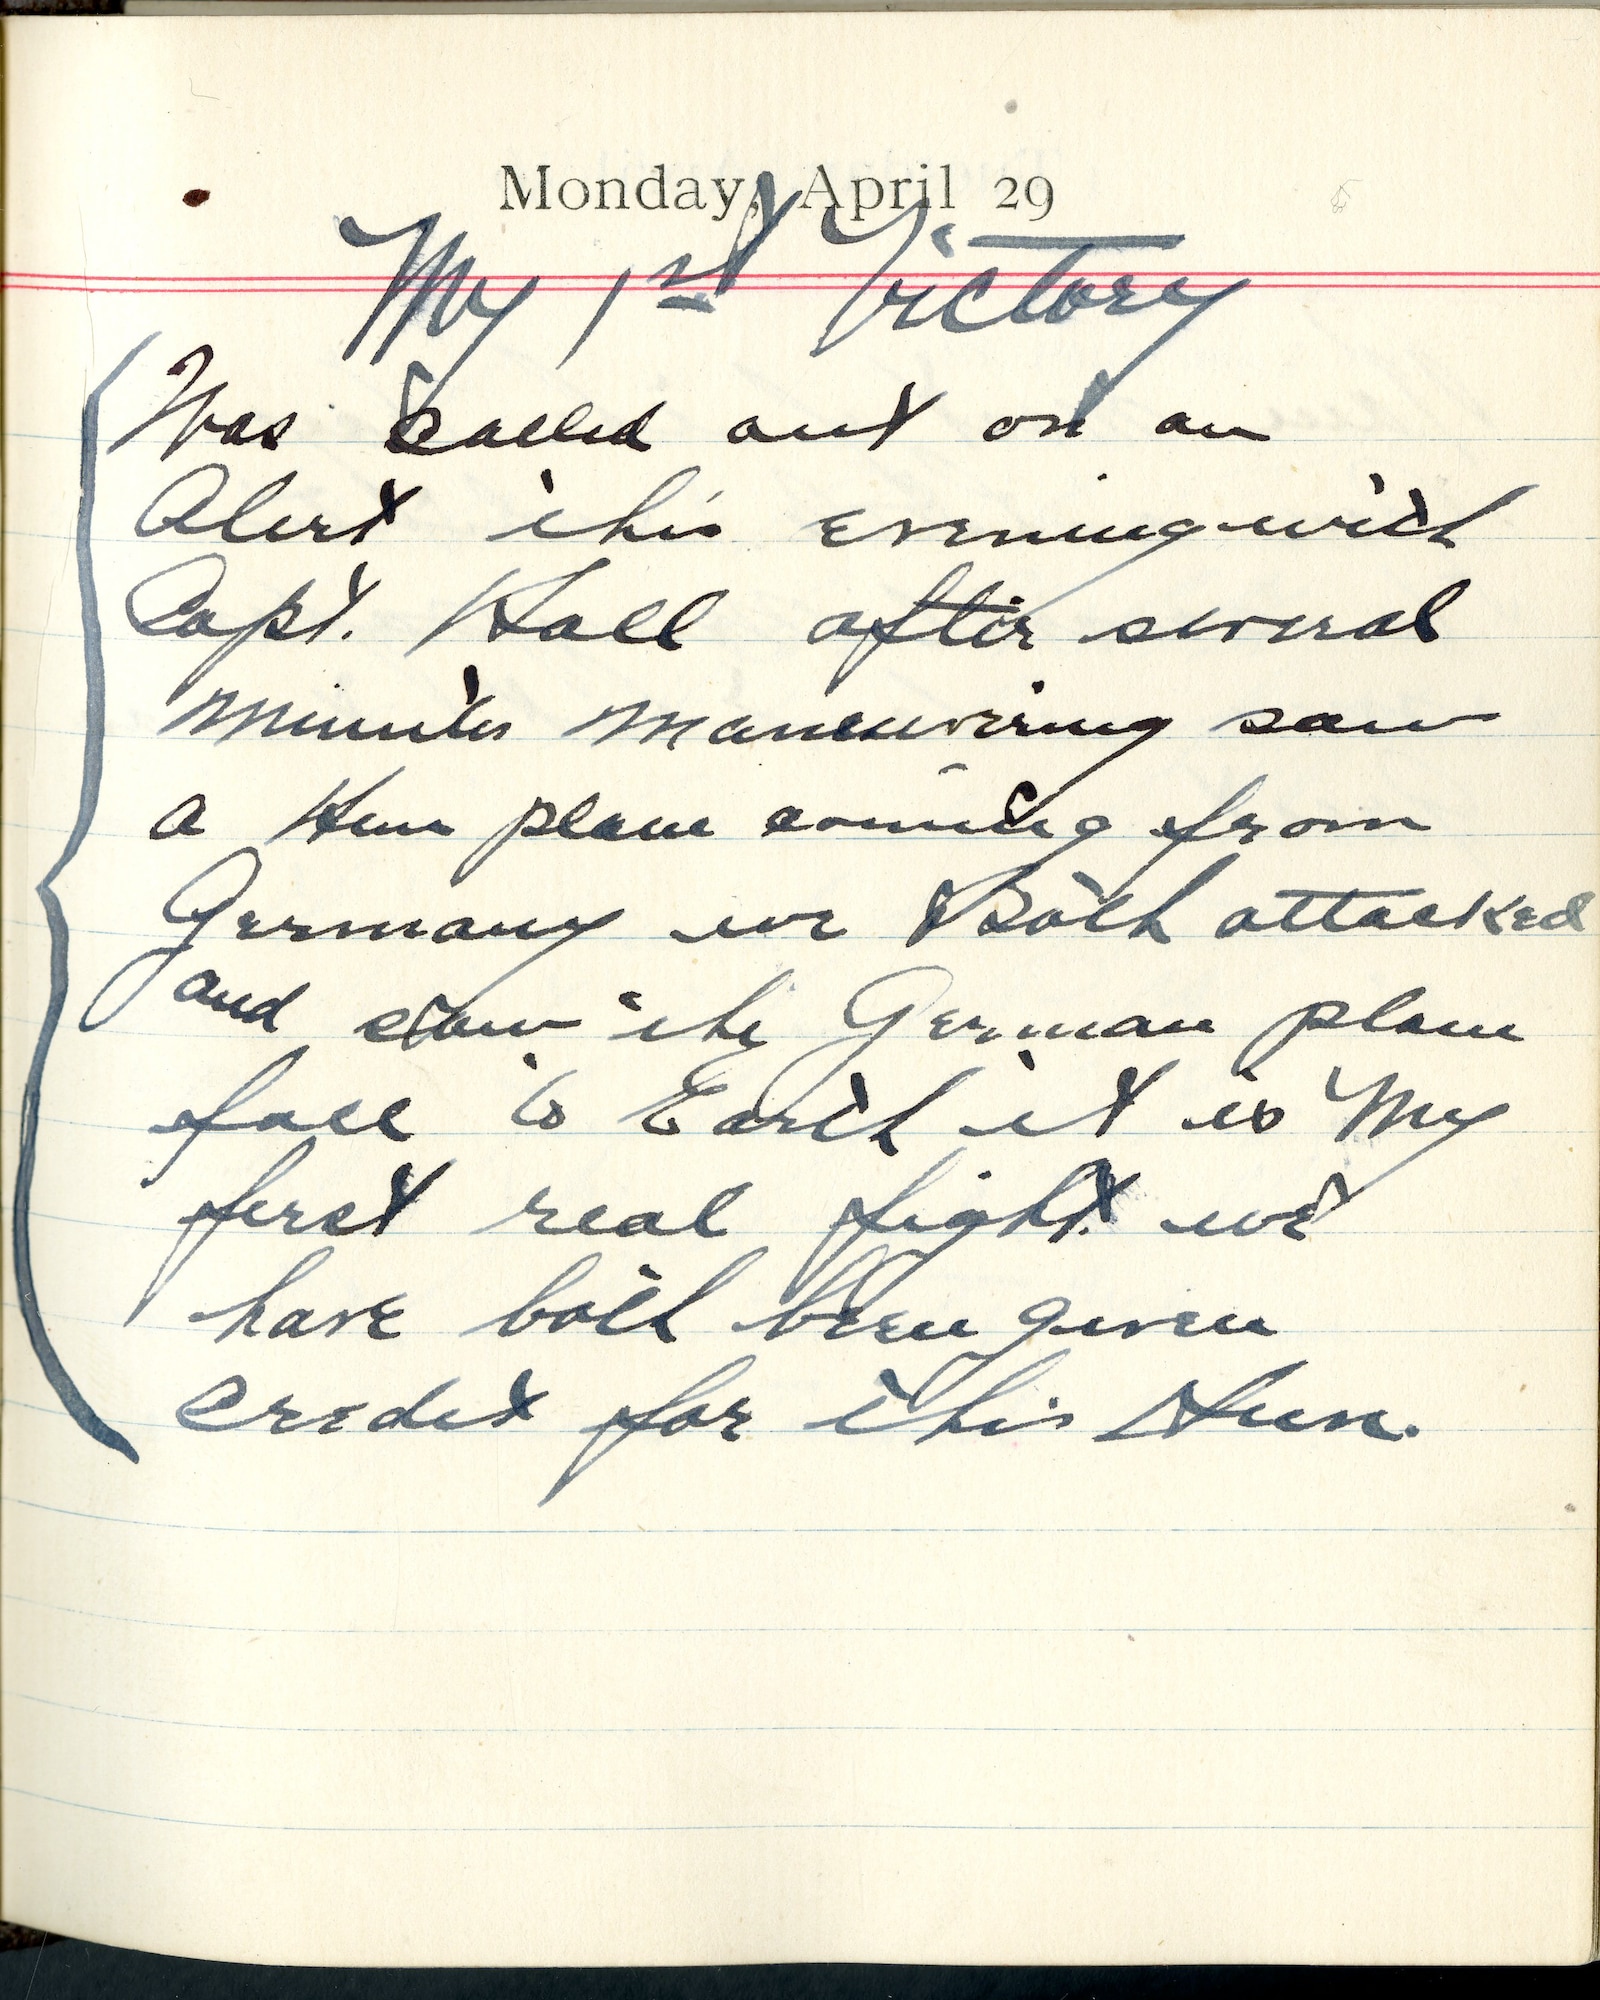 Capt. Edward V. Rickenbacker's 1918 wartime diary entry. (04/29/1918)

 <My First Victory>

Was called out on an alert this evening with Capt. [James N.] Hall.  After several minutes maneuvering saw a Hun plane coming from Germany.  We both attacked and saw the German plane fall to earth.  It is my first real fight.  We have both been given credit for this Hun.